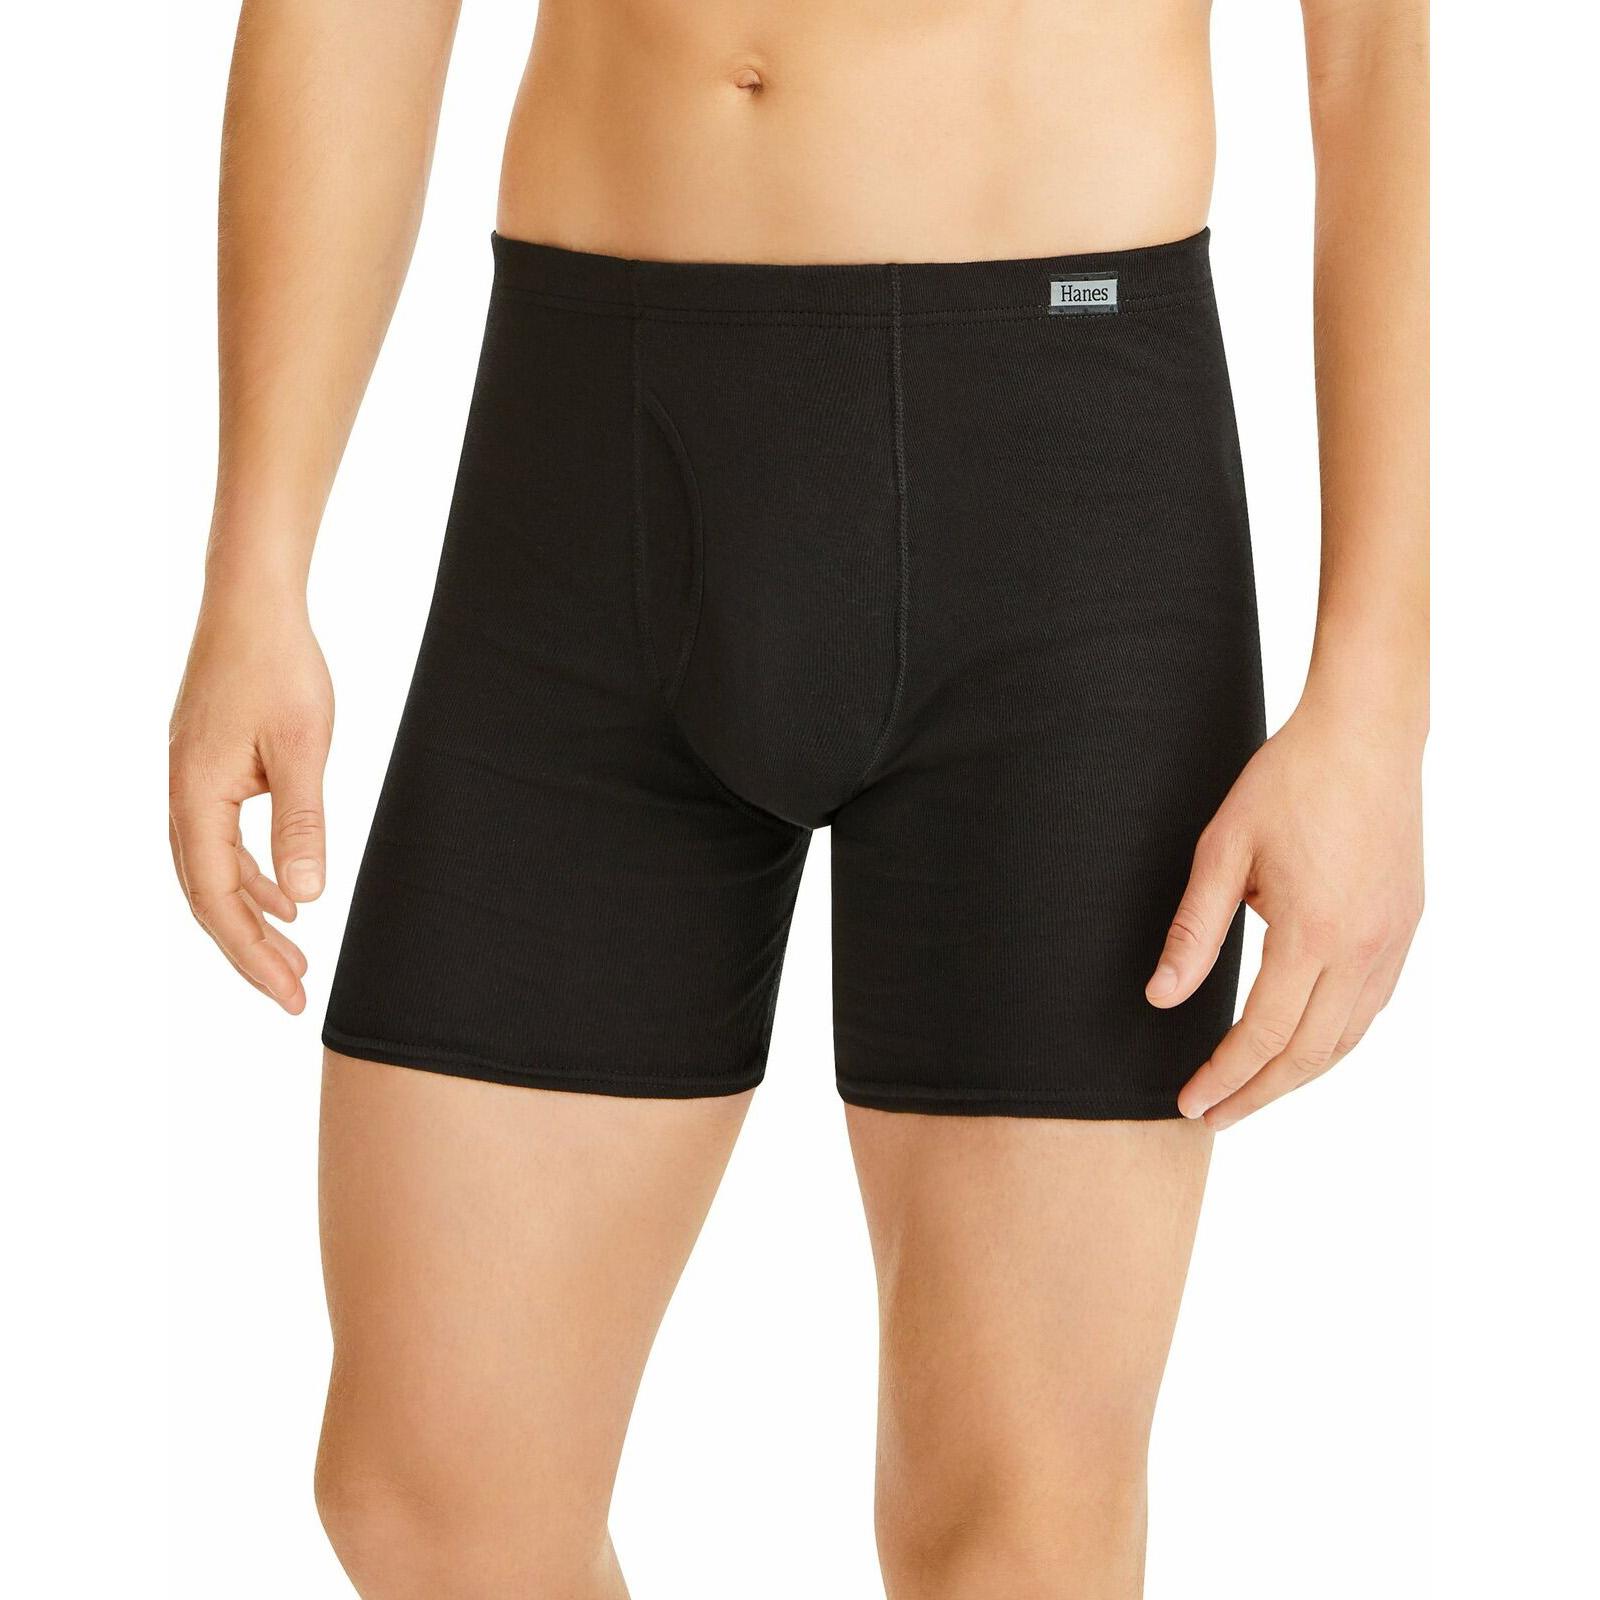 10 Hanes Men's Tagless Boxer Briefs for $17.65 Shipped